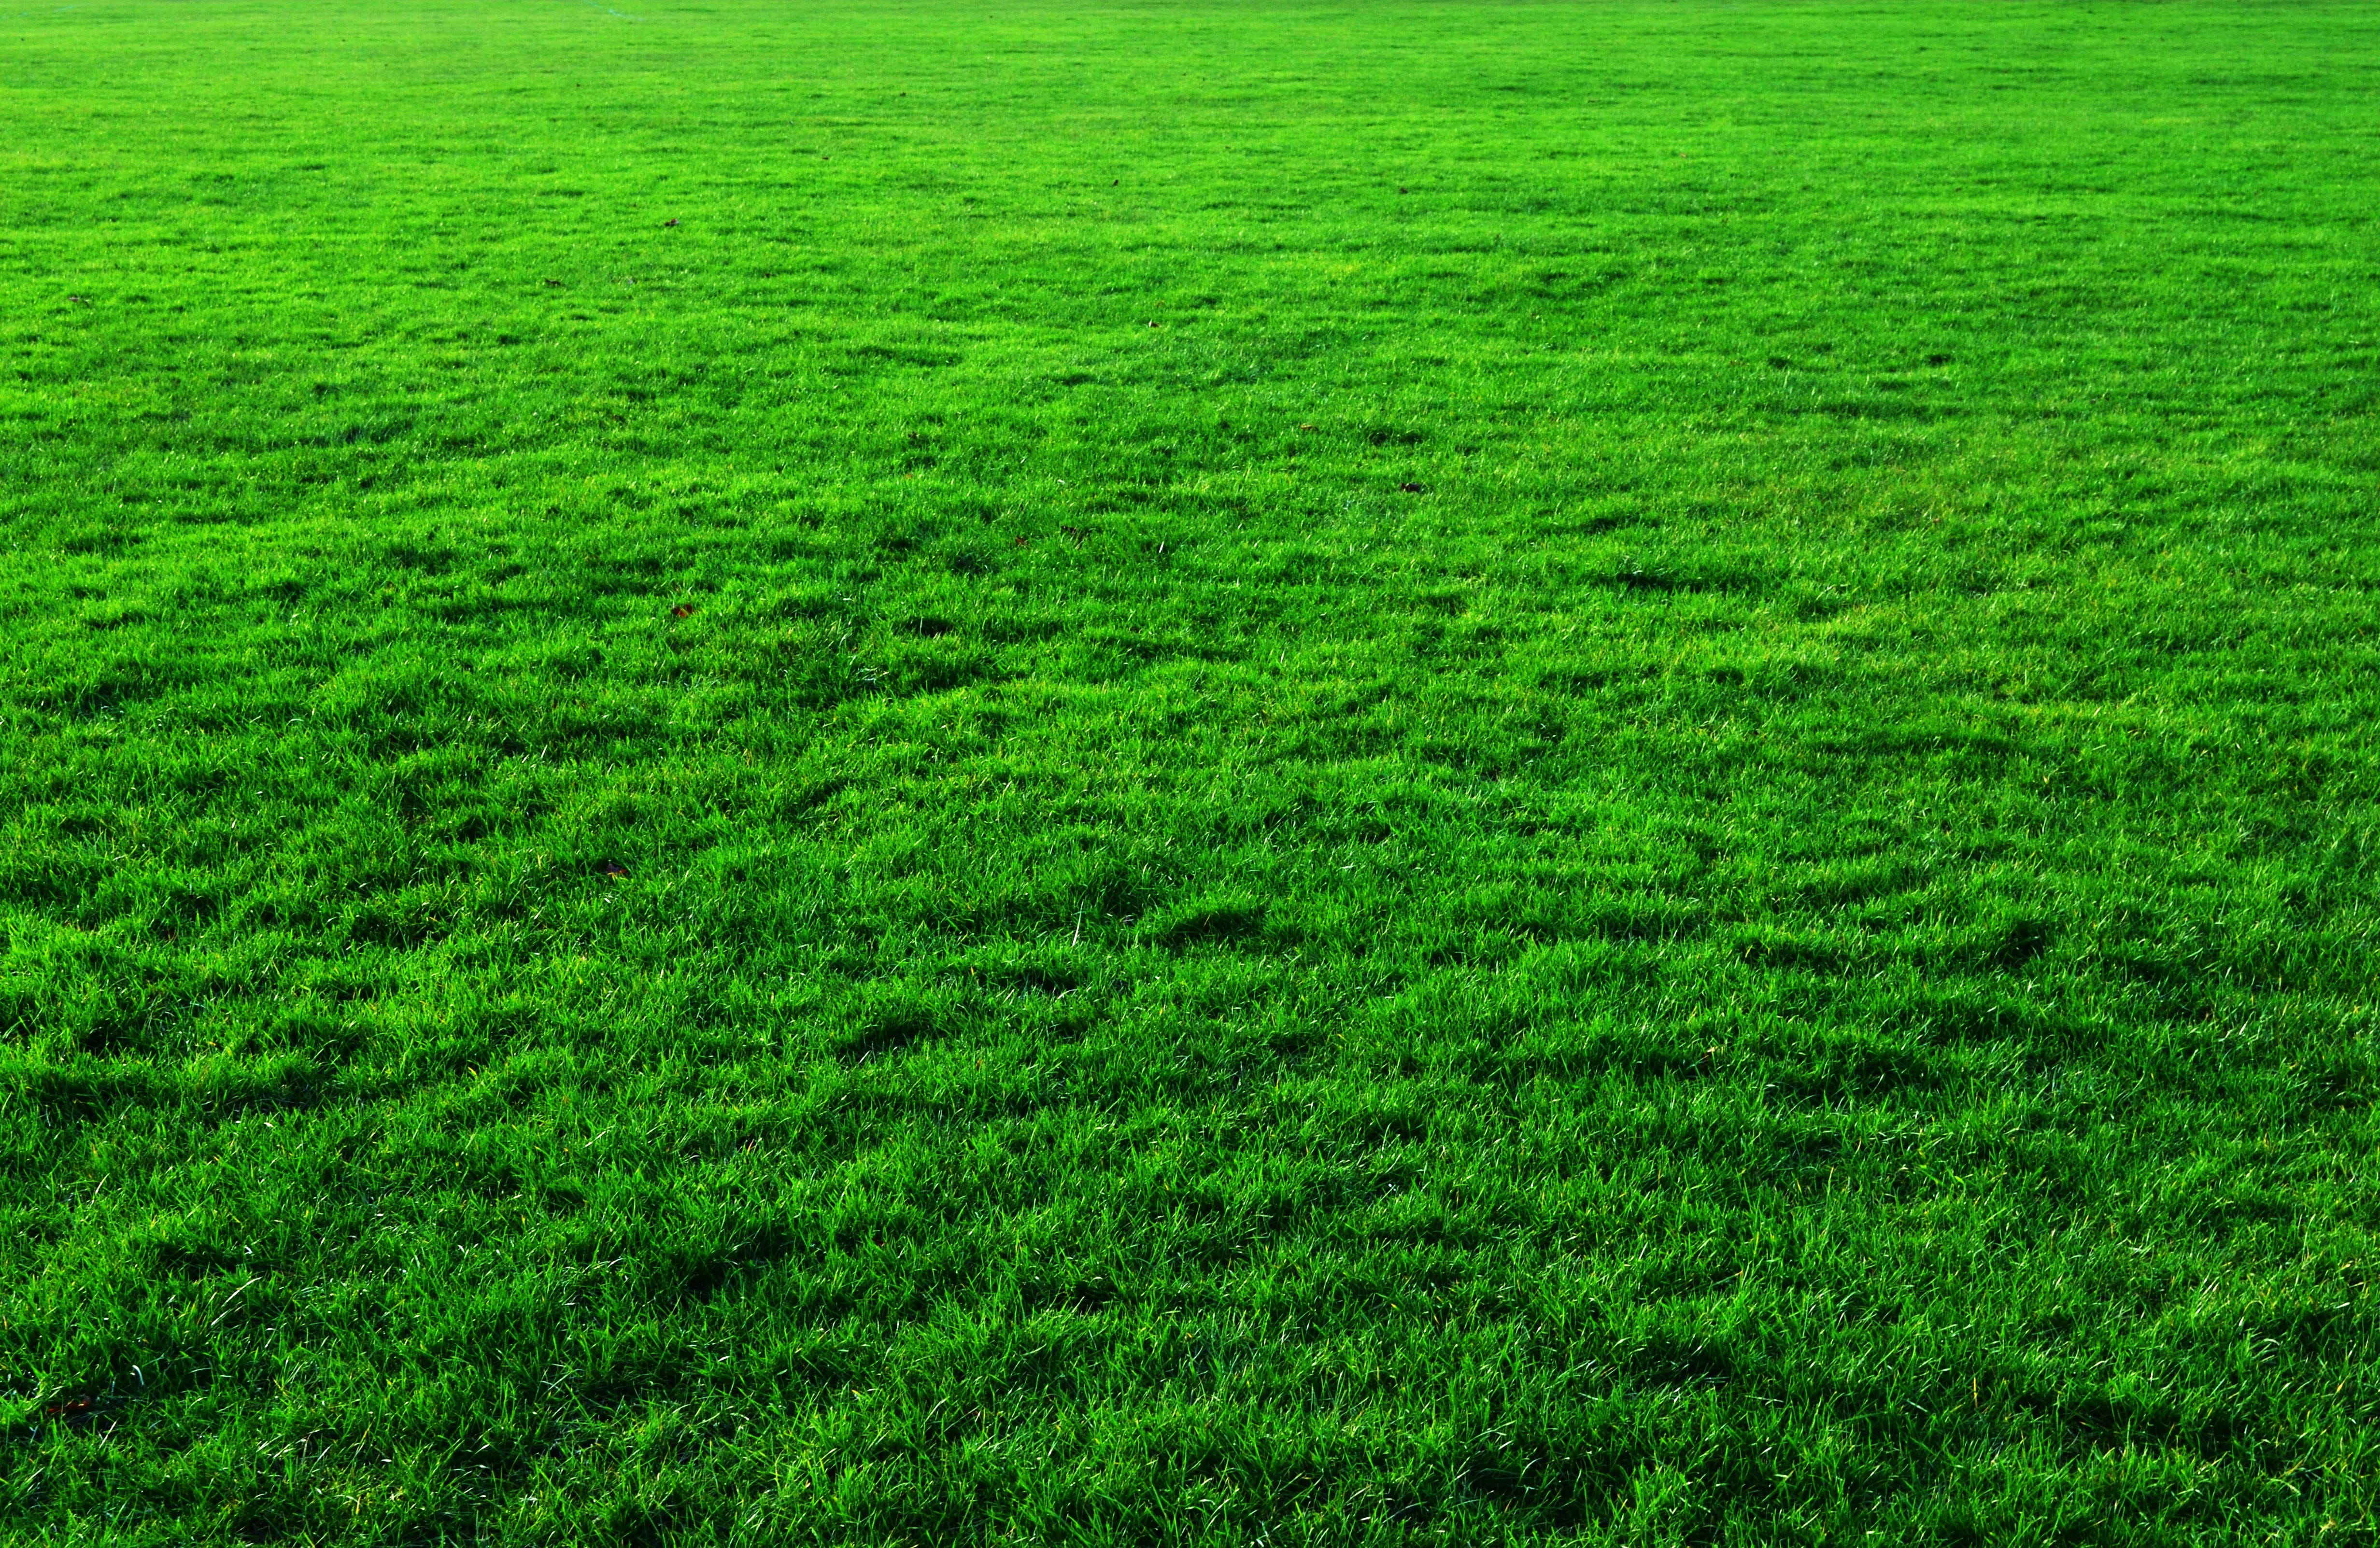 Green Grass Background, photos, lawn, public domain, nature, green Color